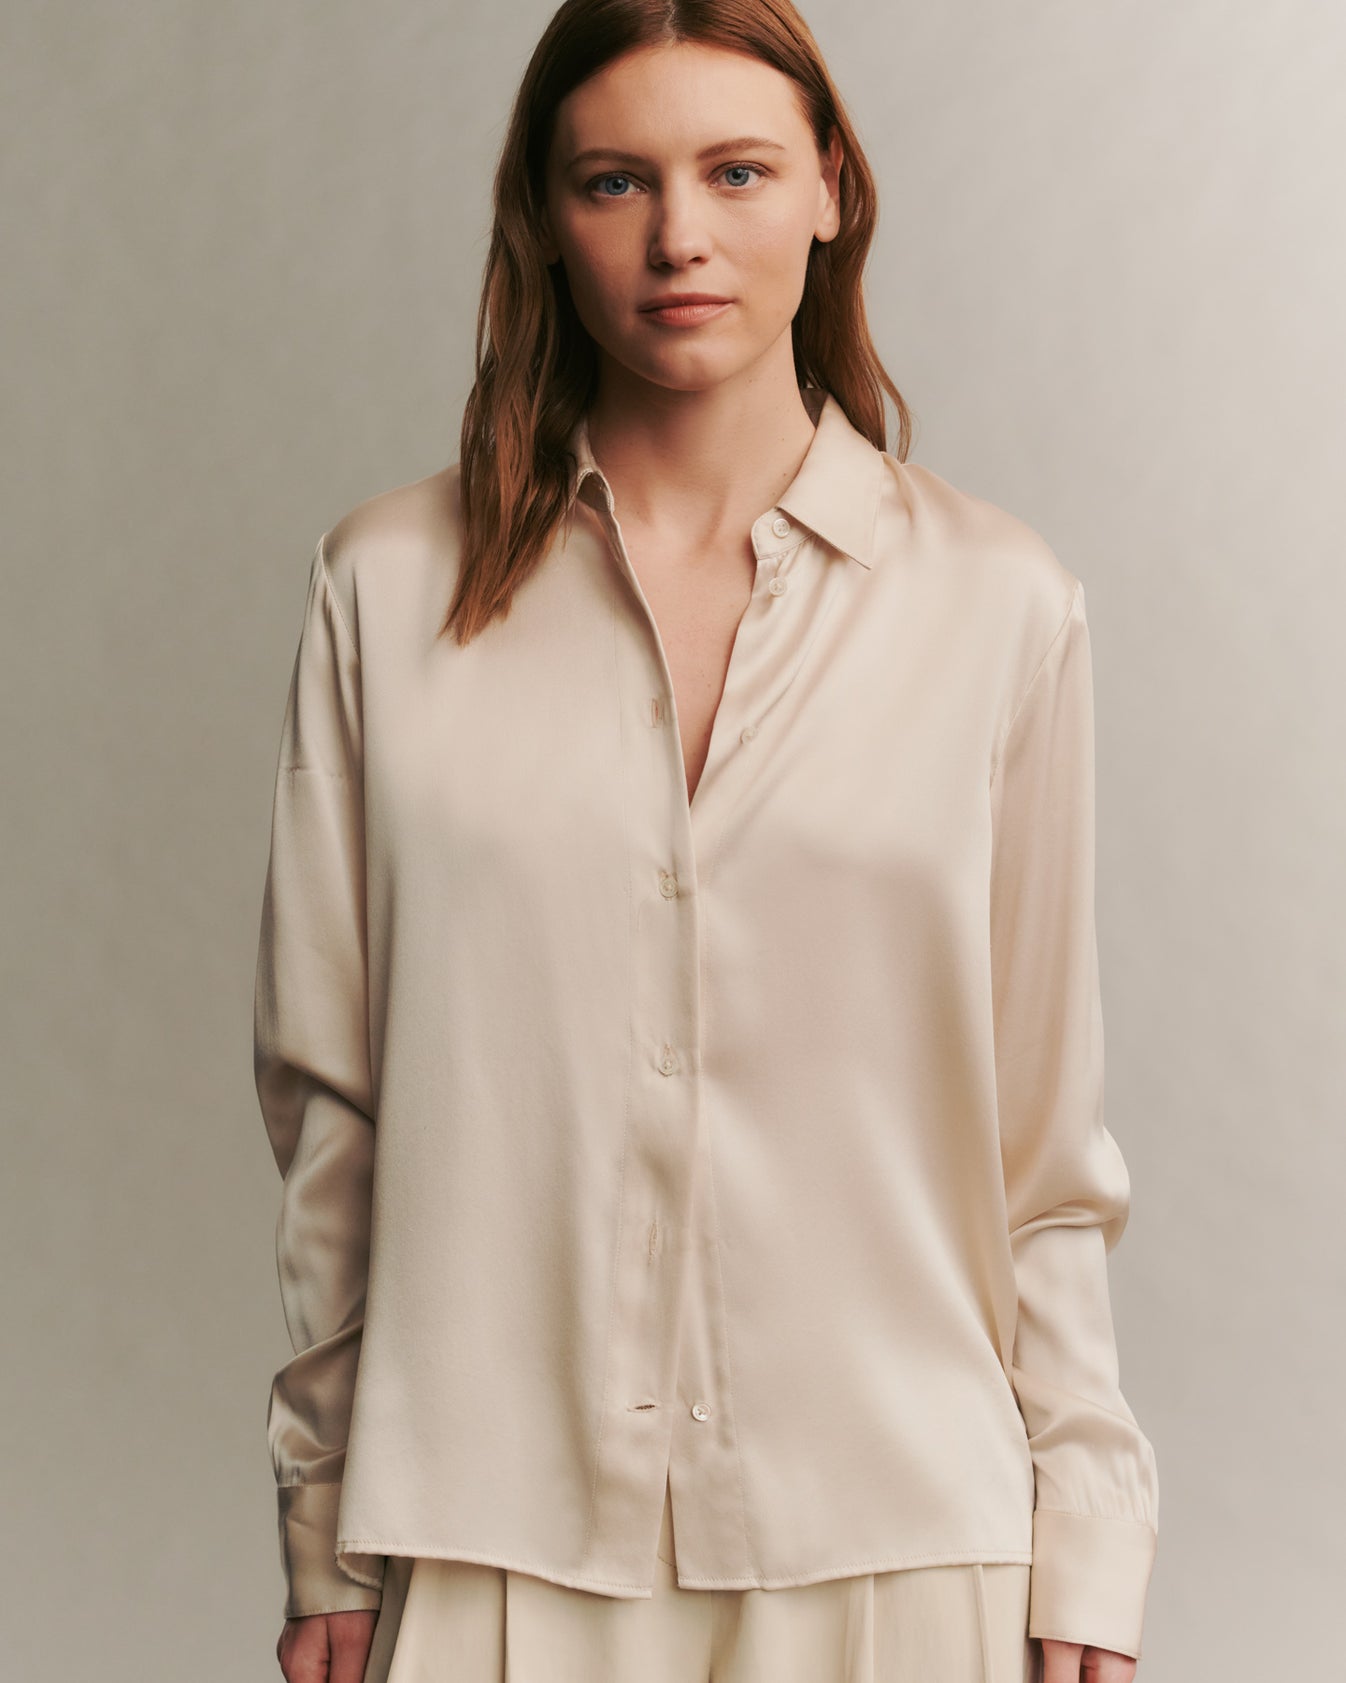 TWP French oak Slim Shirt in Washed Silk Charmeuse view 2